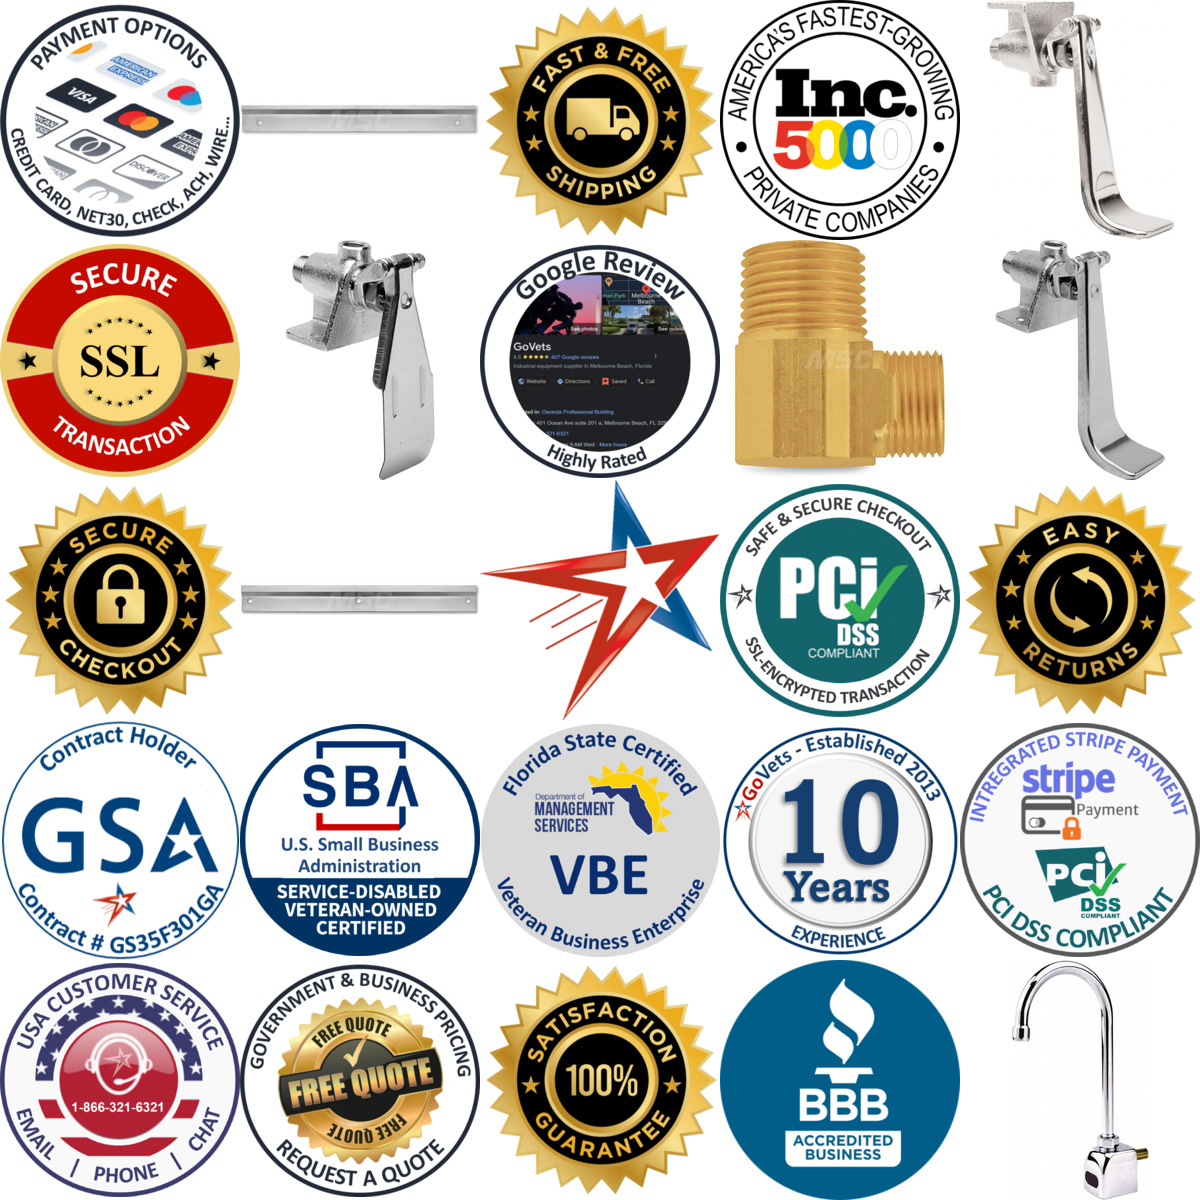 A selection of Water and Steam Hose products on GoVets